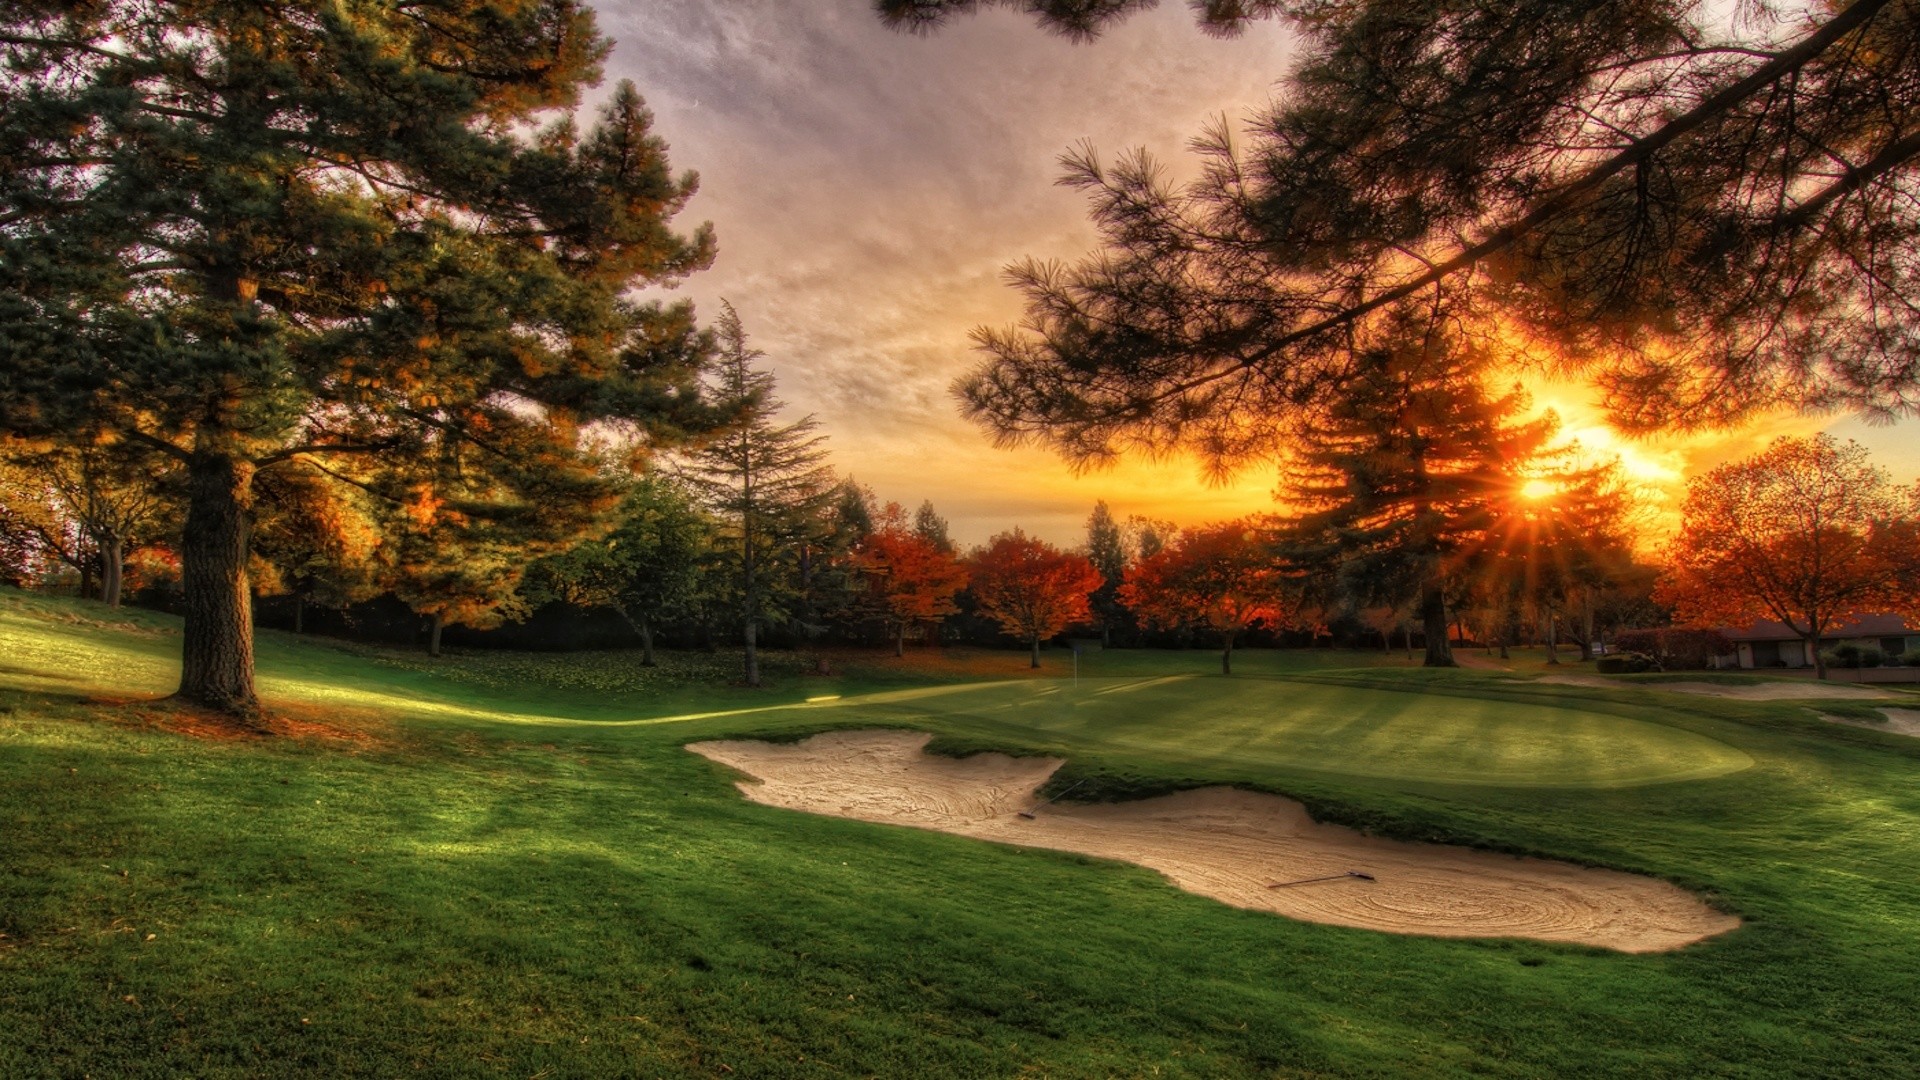 1920x1080 scenic wallpaper hdr | high resolution  Download Golf Sunset Hdr  248786 background .